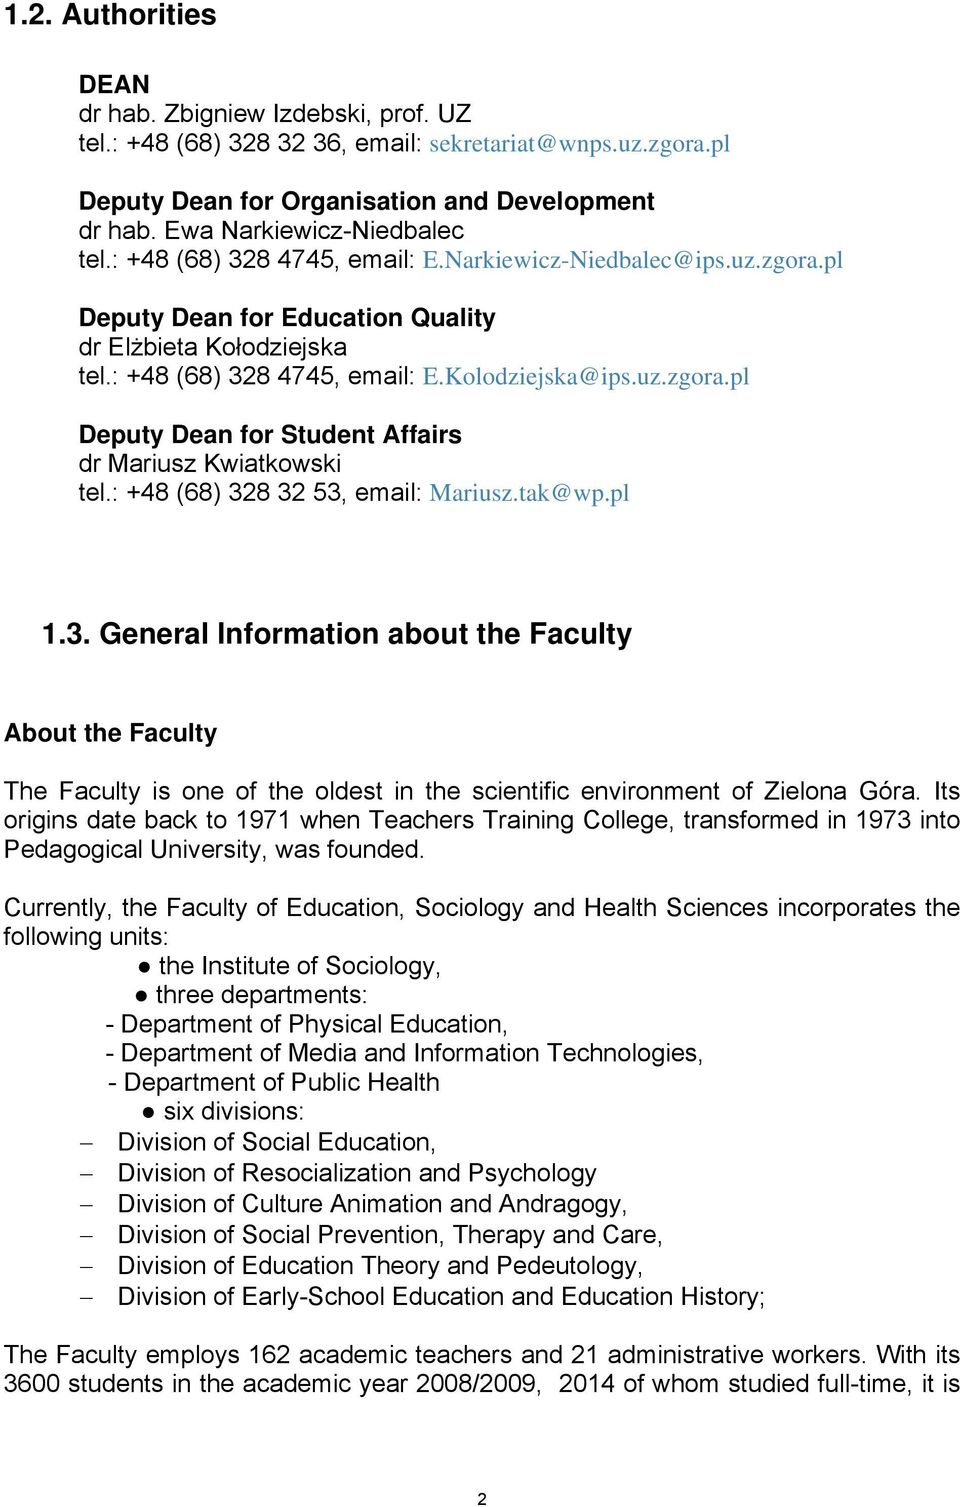 : +48 (68) 38 3 53, email: Mariusz.tak@wp.pl 1.3. General Information about the Faculty About the Faculty The Faculty is one the oldest in the scientific environment Zielona Góra.